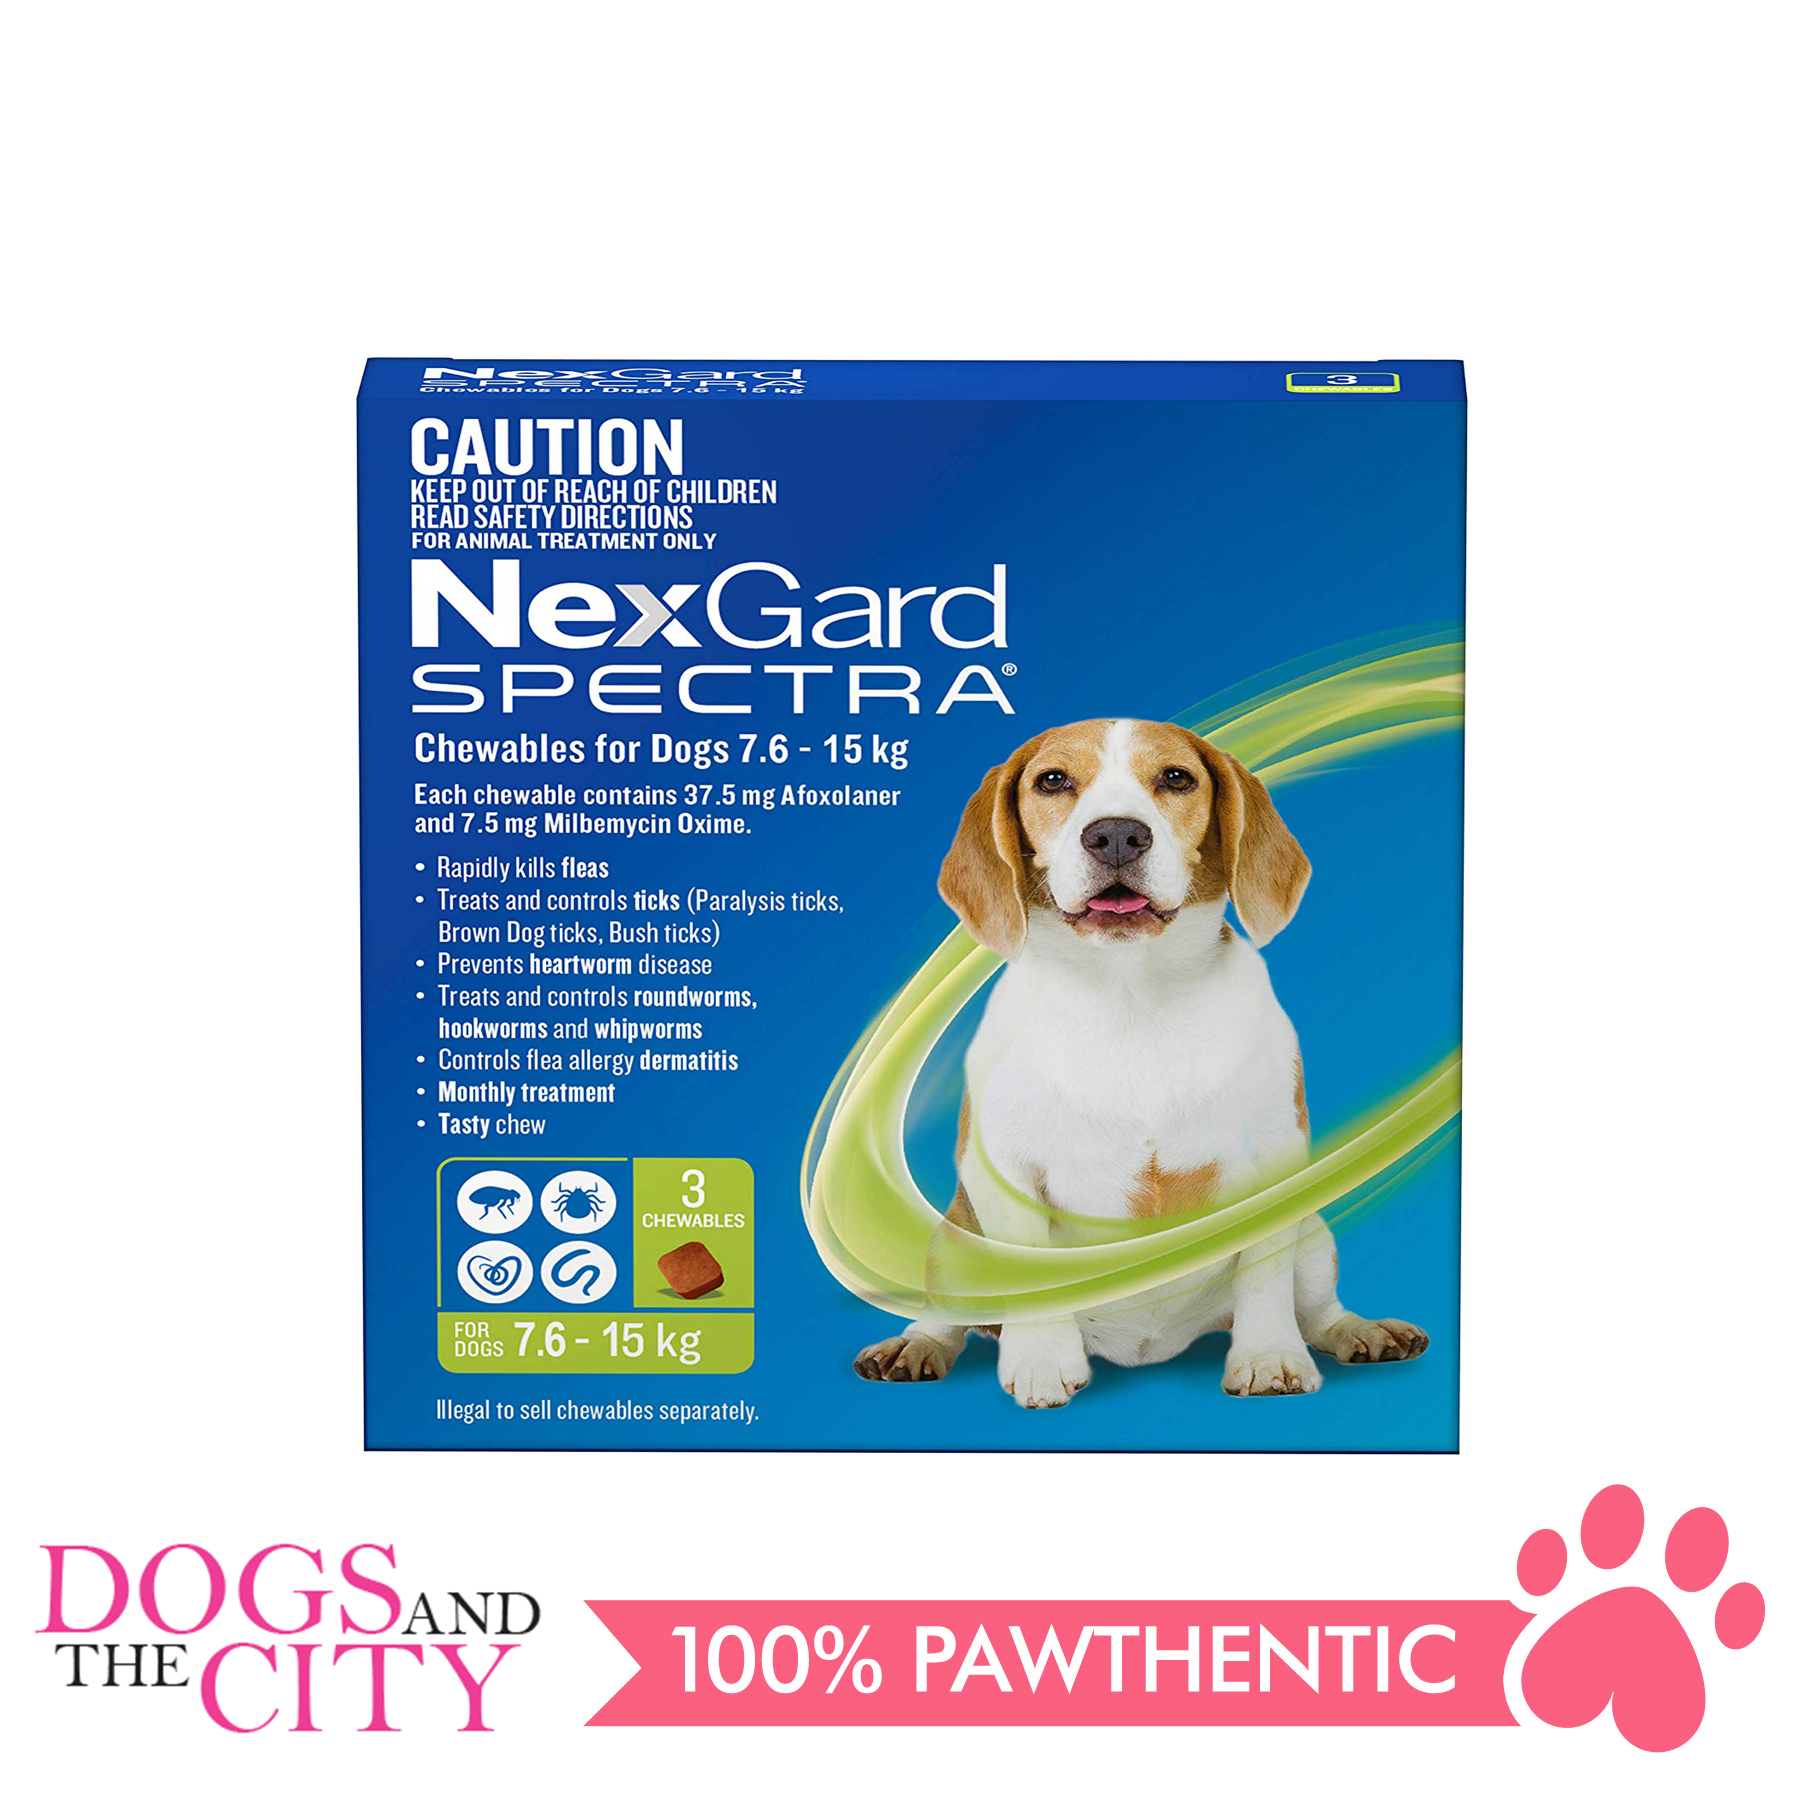 NexGard Spectra Chewable Tablets for Dogs 7 5 15kg Green Box 3 